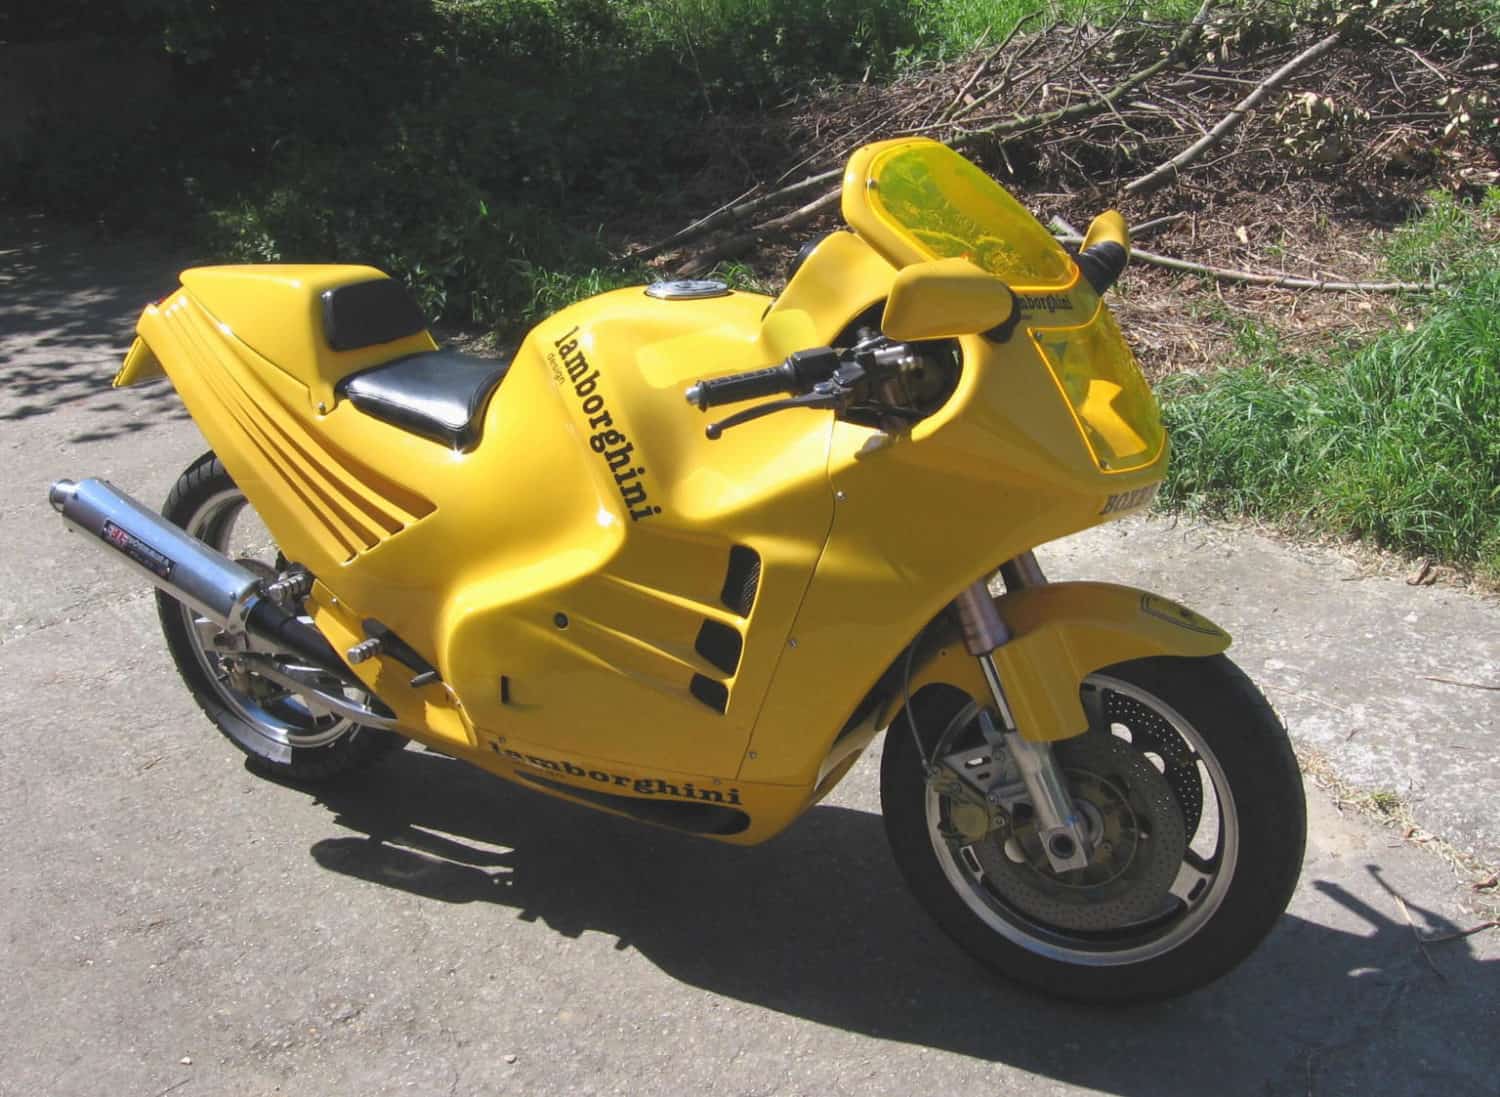 Lamborghini Motorcycle from the 80s- Design 90 Superbike